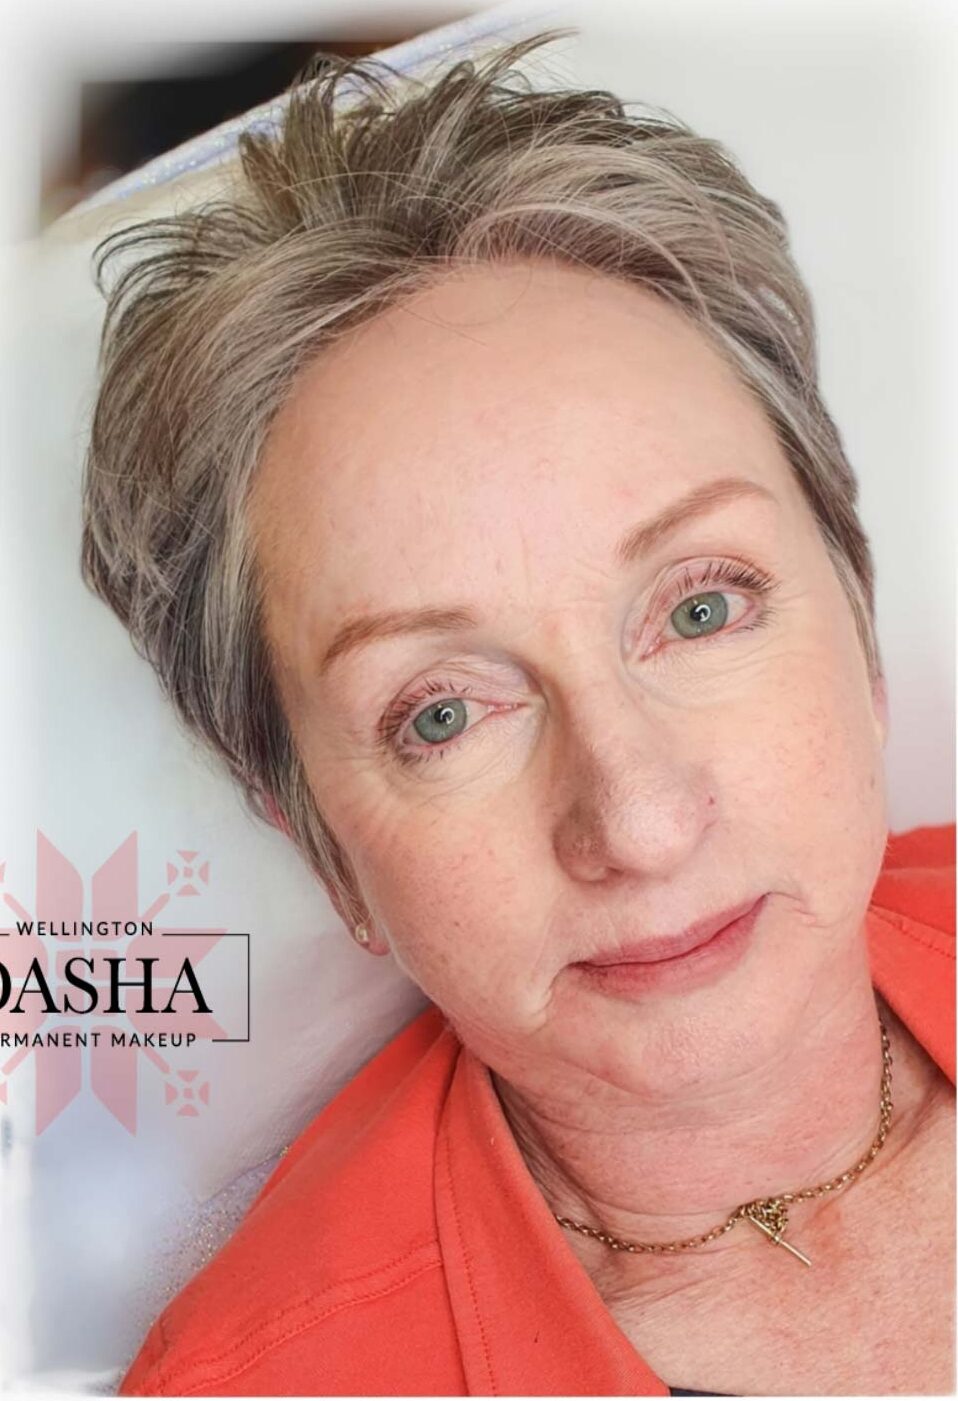 Eyebrows Semi Permanent Makeup. Cosmetic and Mediical Tattoo by Dasha. Permanent makeup and reconstructive tattoo, scalp micro-pigmentation in Christchurch, New Zealand